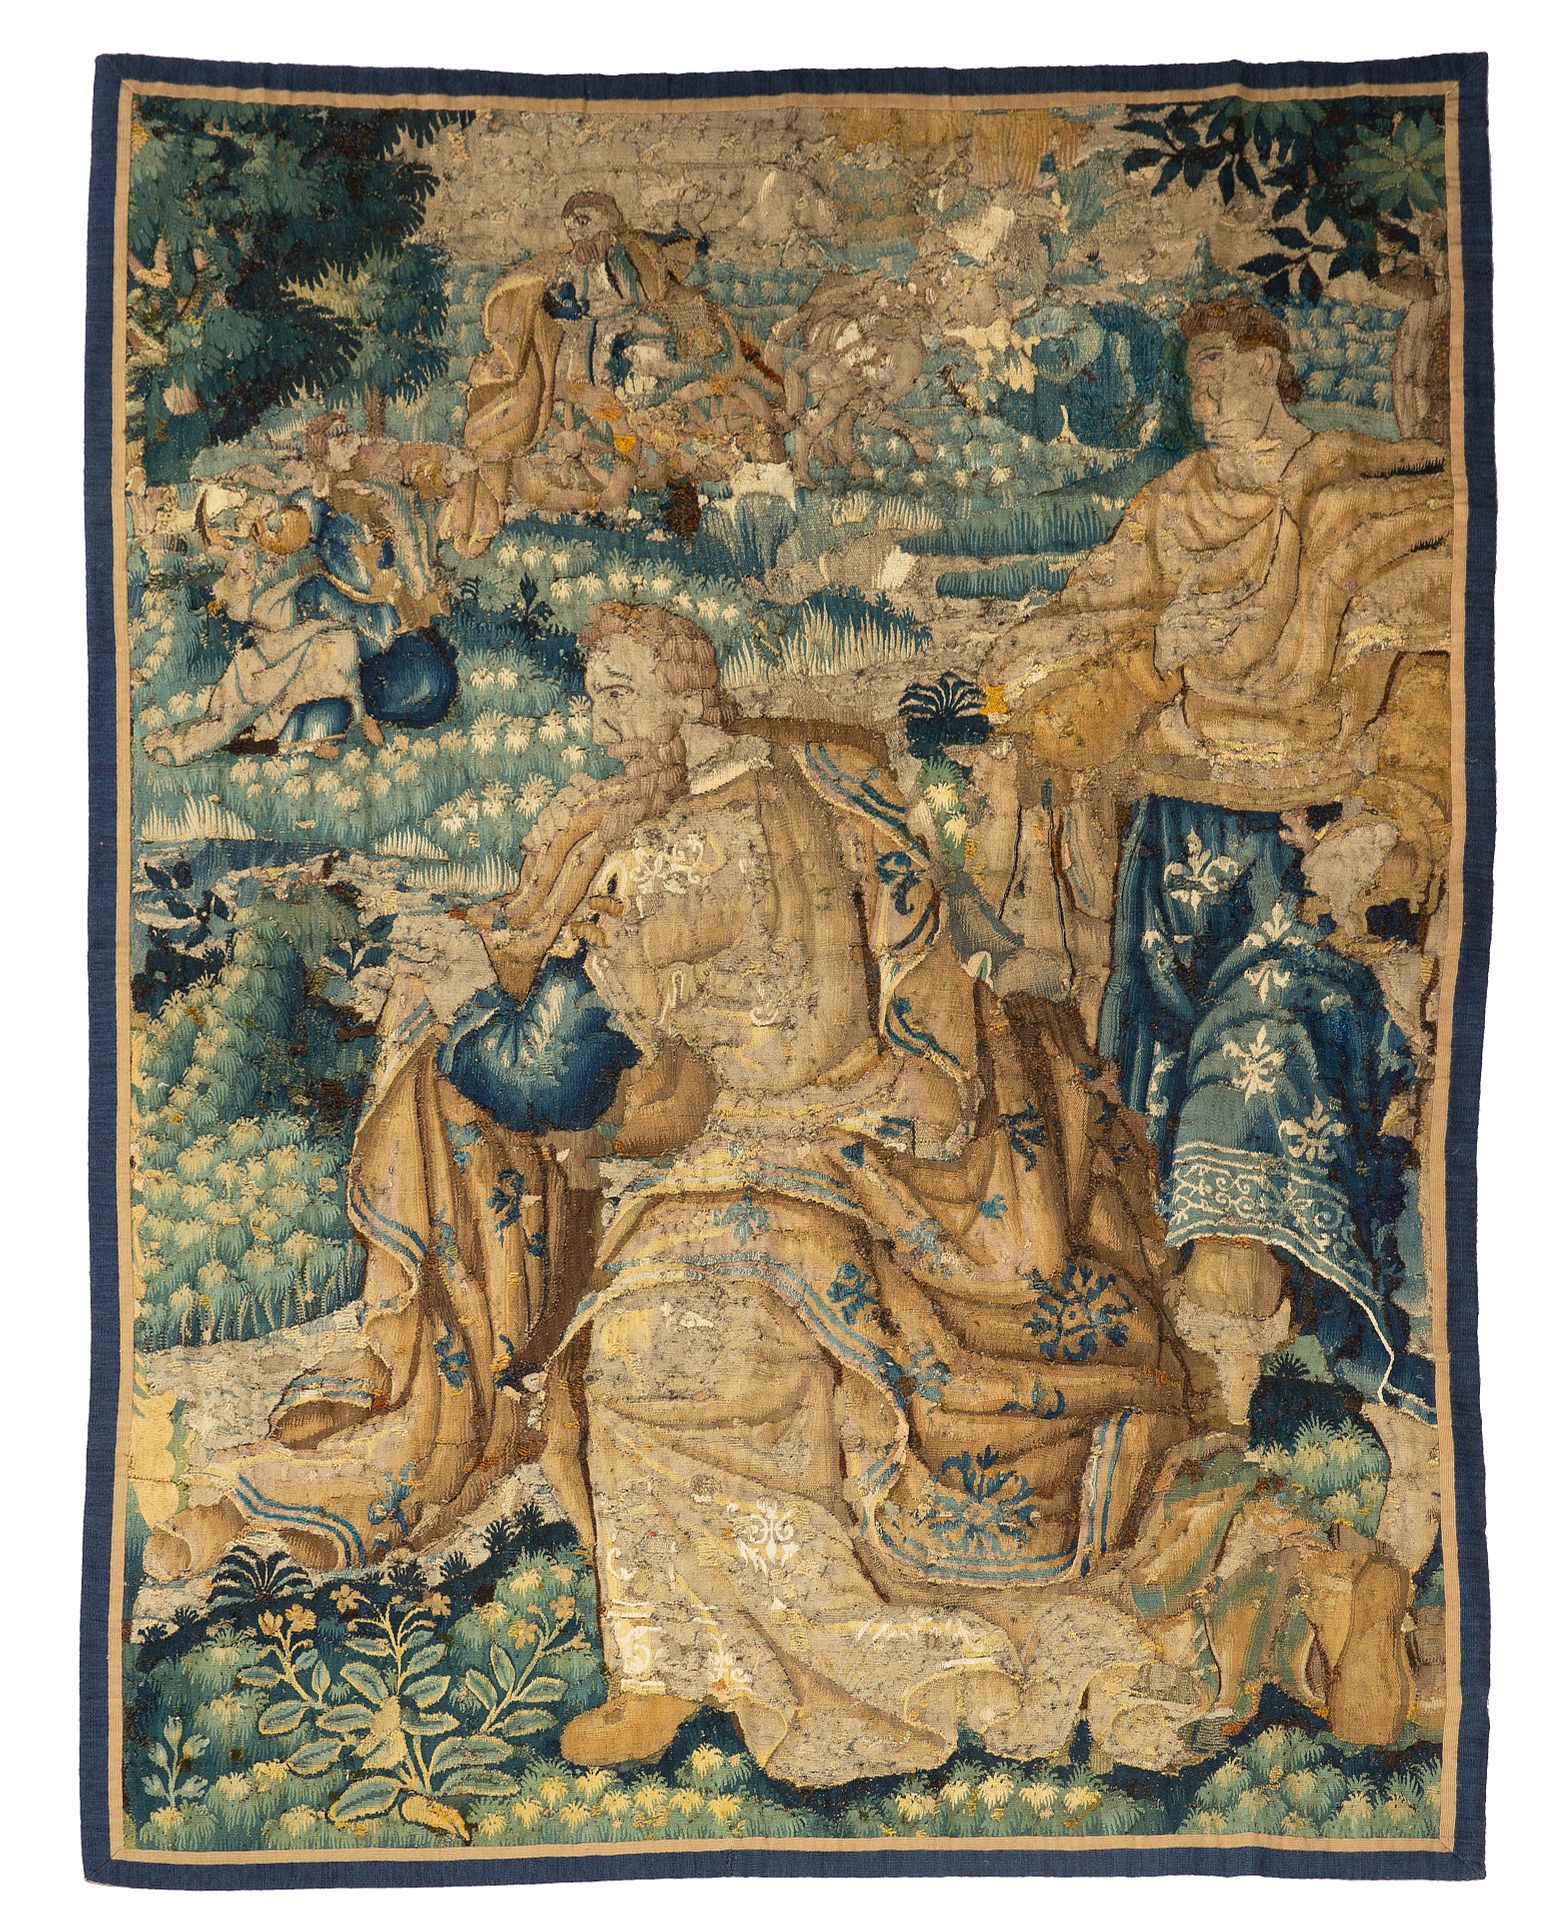 Null Tapestry from Flanders, from the end of the 16th century

Technical charact&hellip;